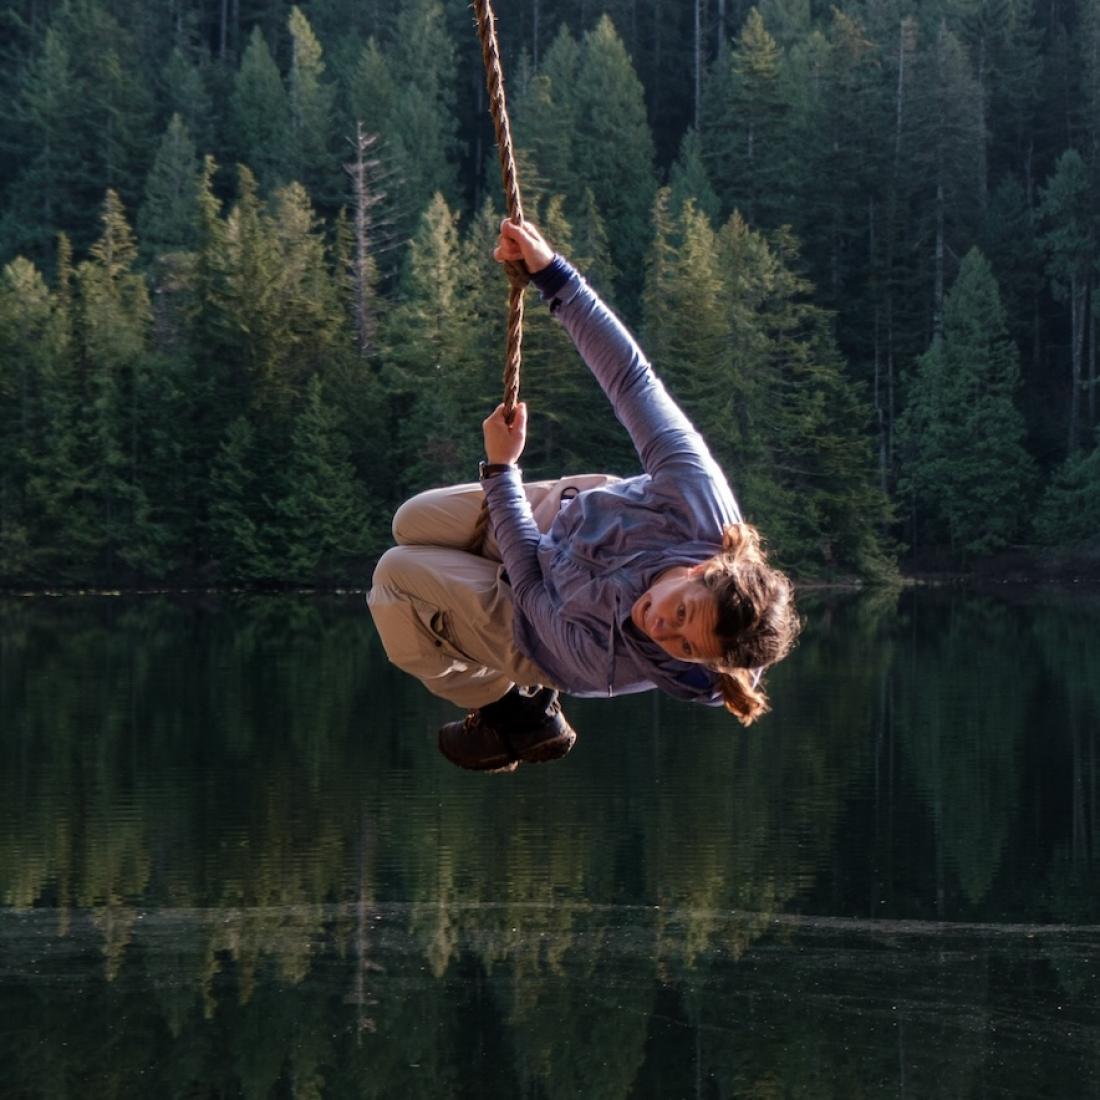 Laura Ginter swinging on a road swing over water with trees behind